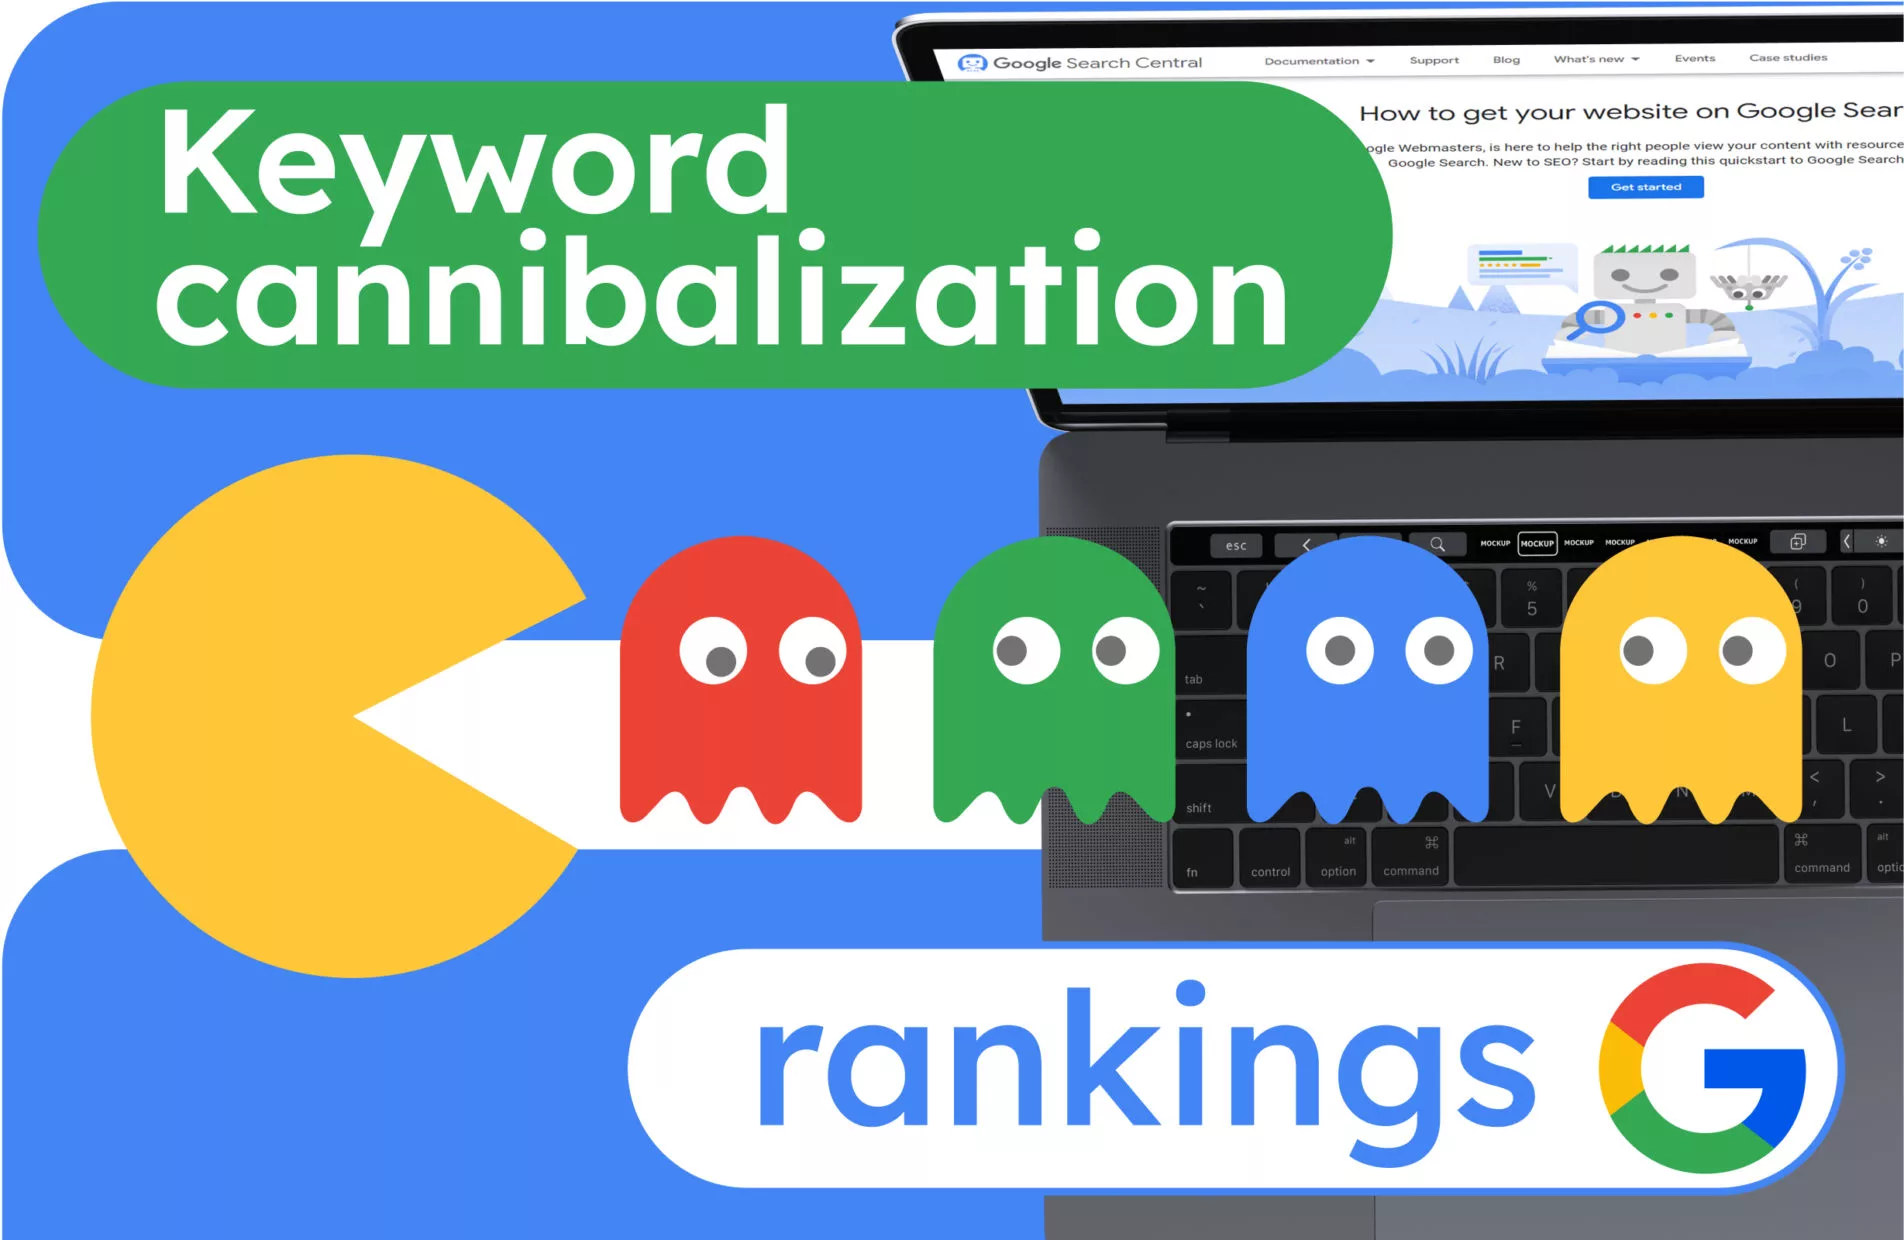 How keyword cannibalization can affect your business?